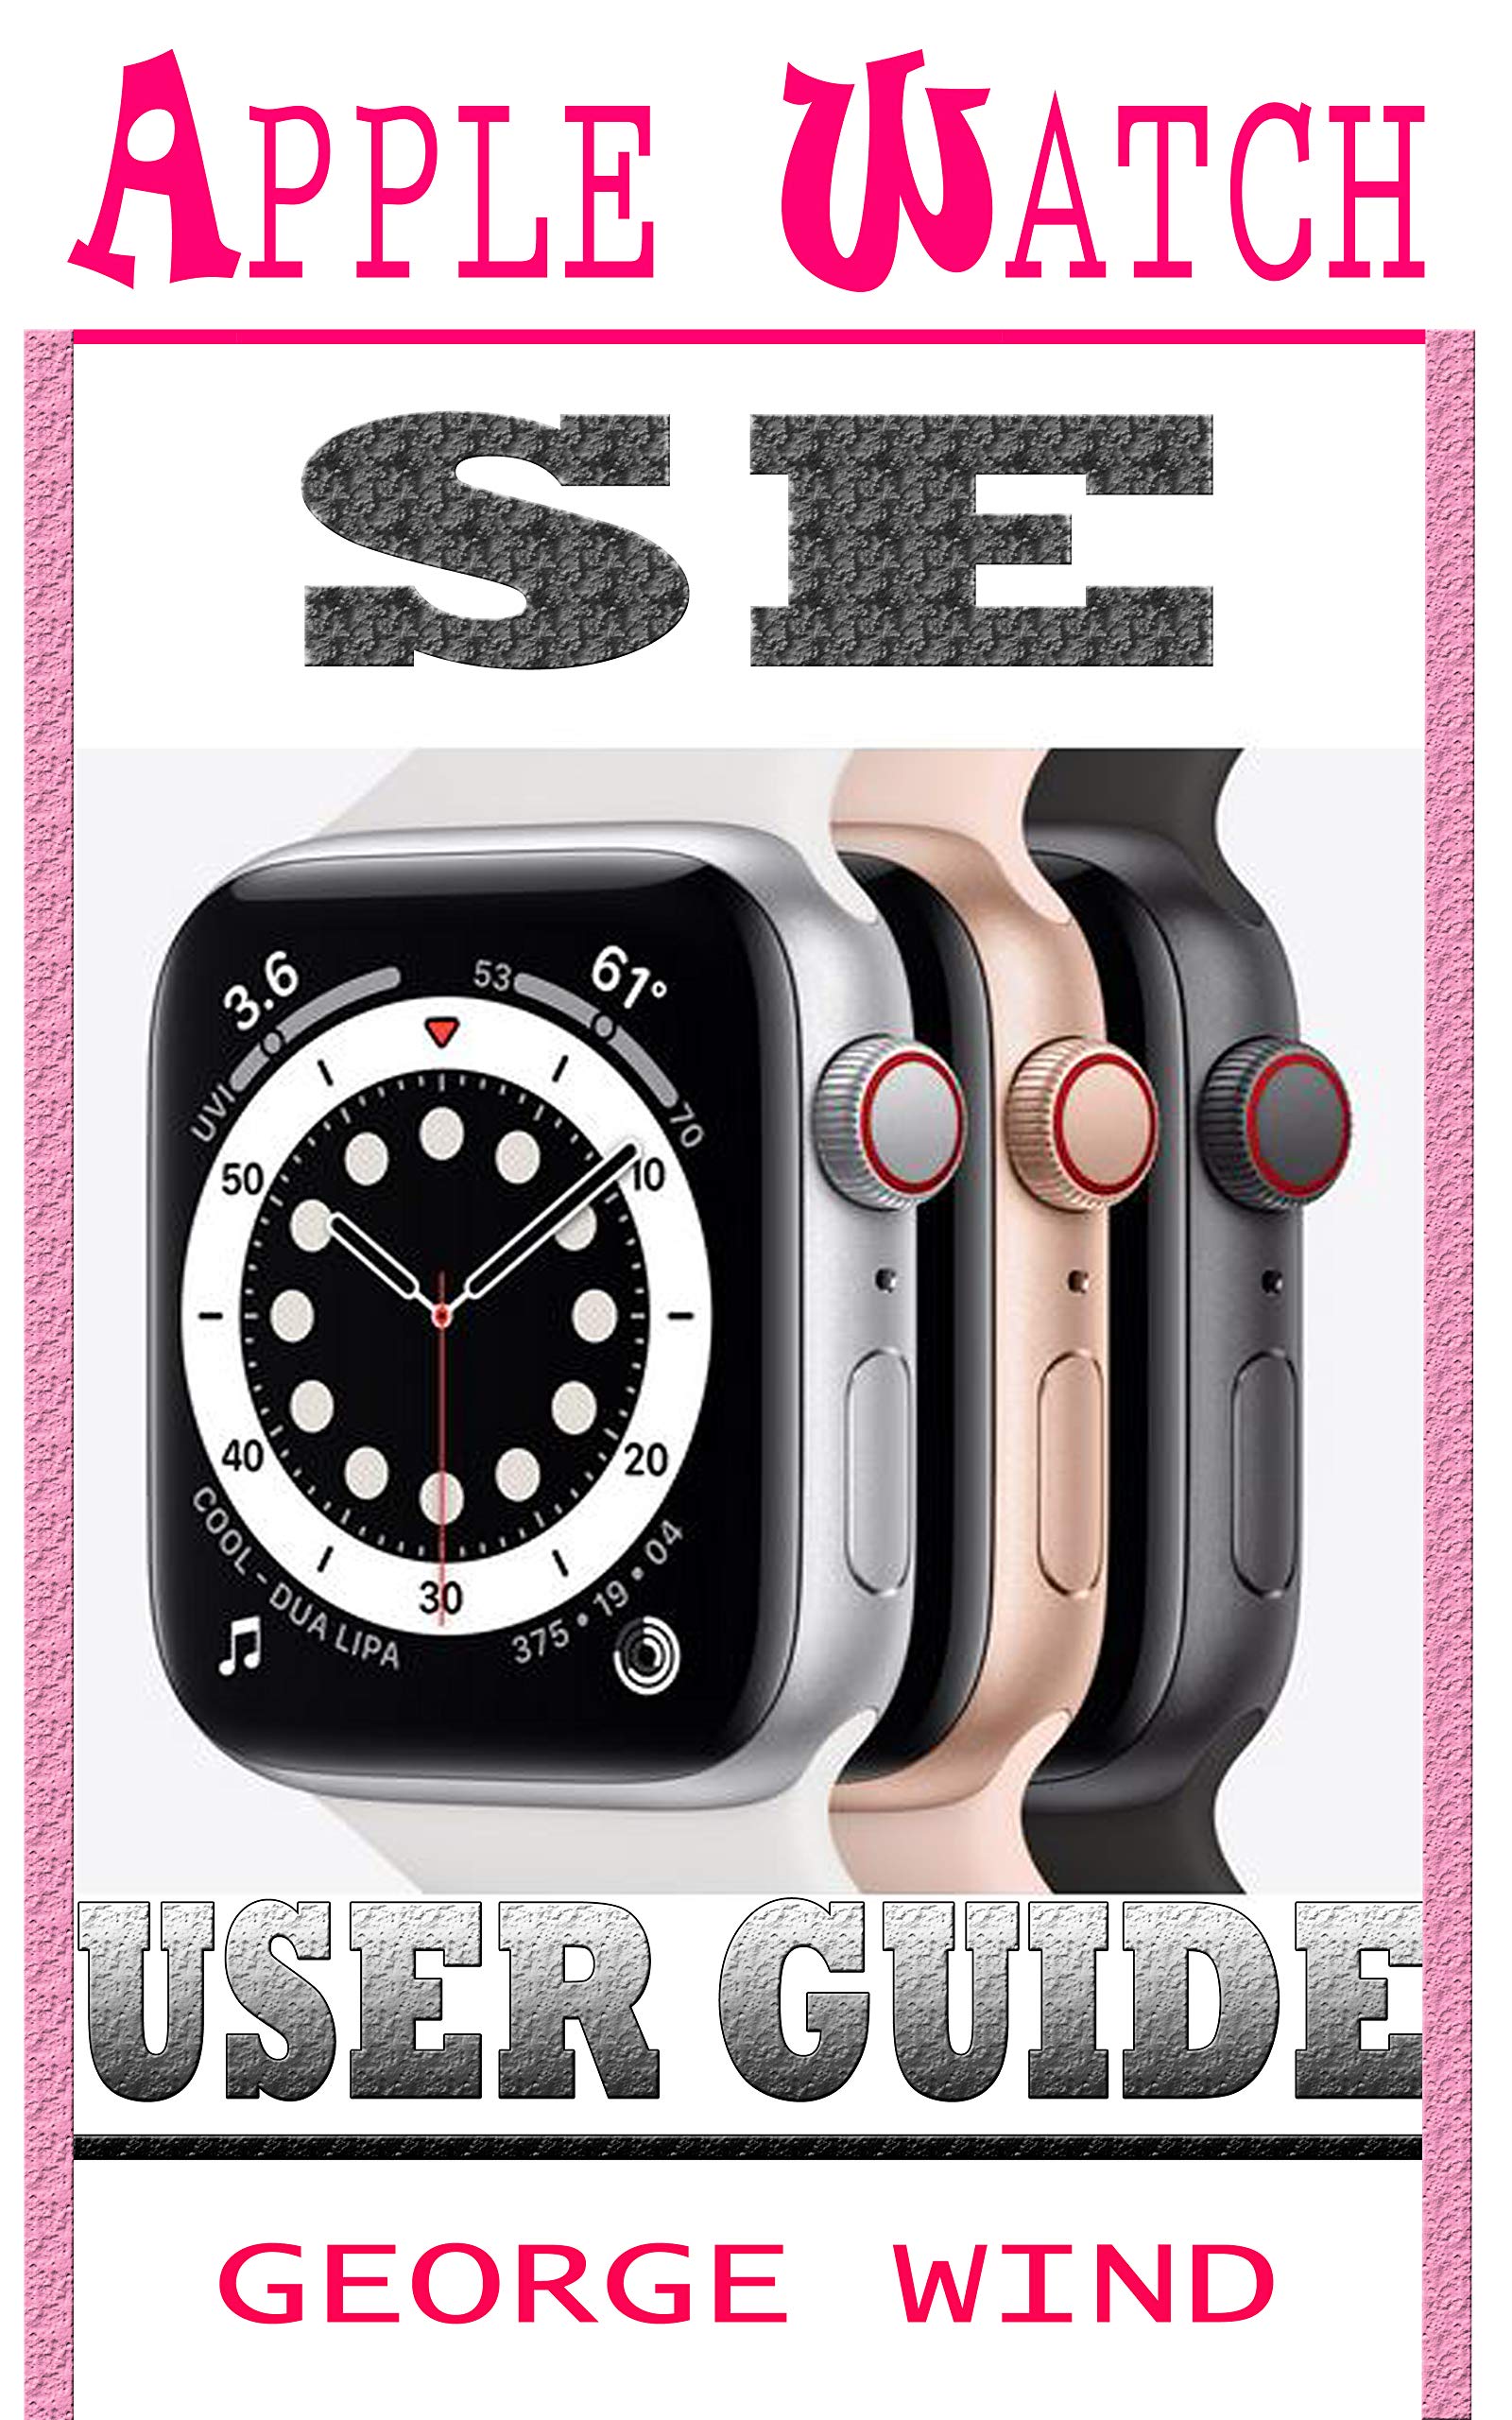 APPLE WATCH SE USER GUIDE: A Step By Step Instruction Manual For Beginners And Seniors To Setup and Master The Apple Watch SE And WatchOS 7 with Easy Tips And Tricks For The New iWatch